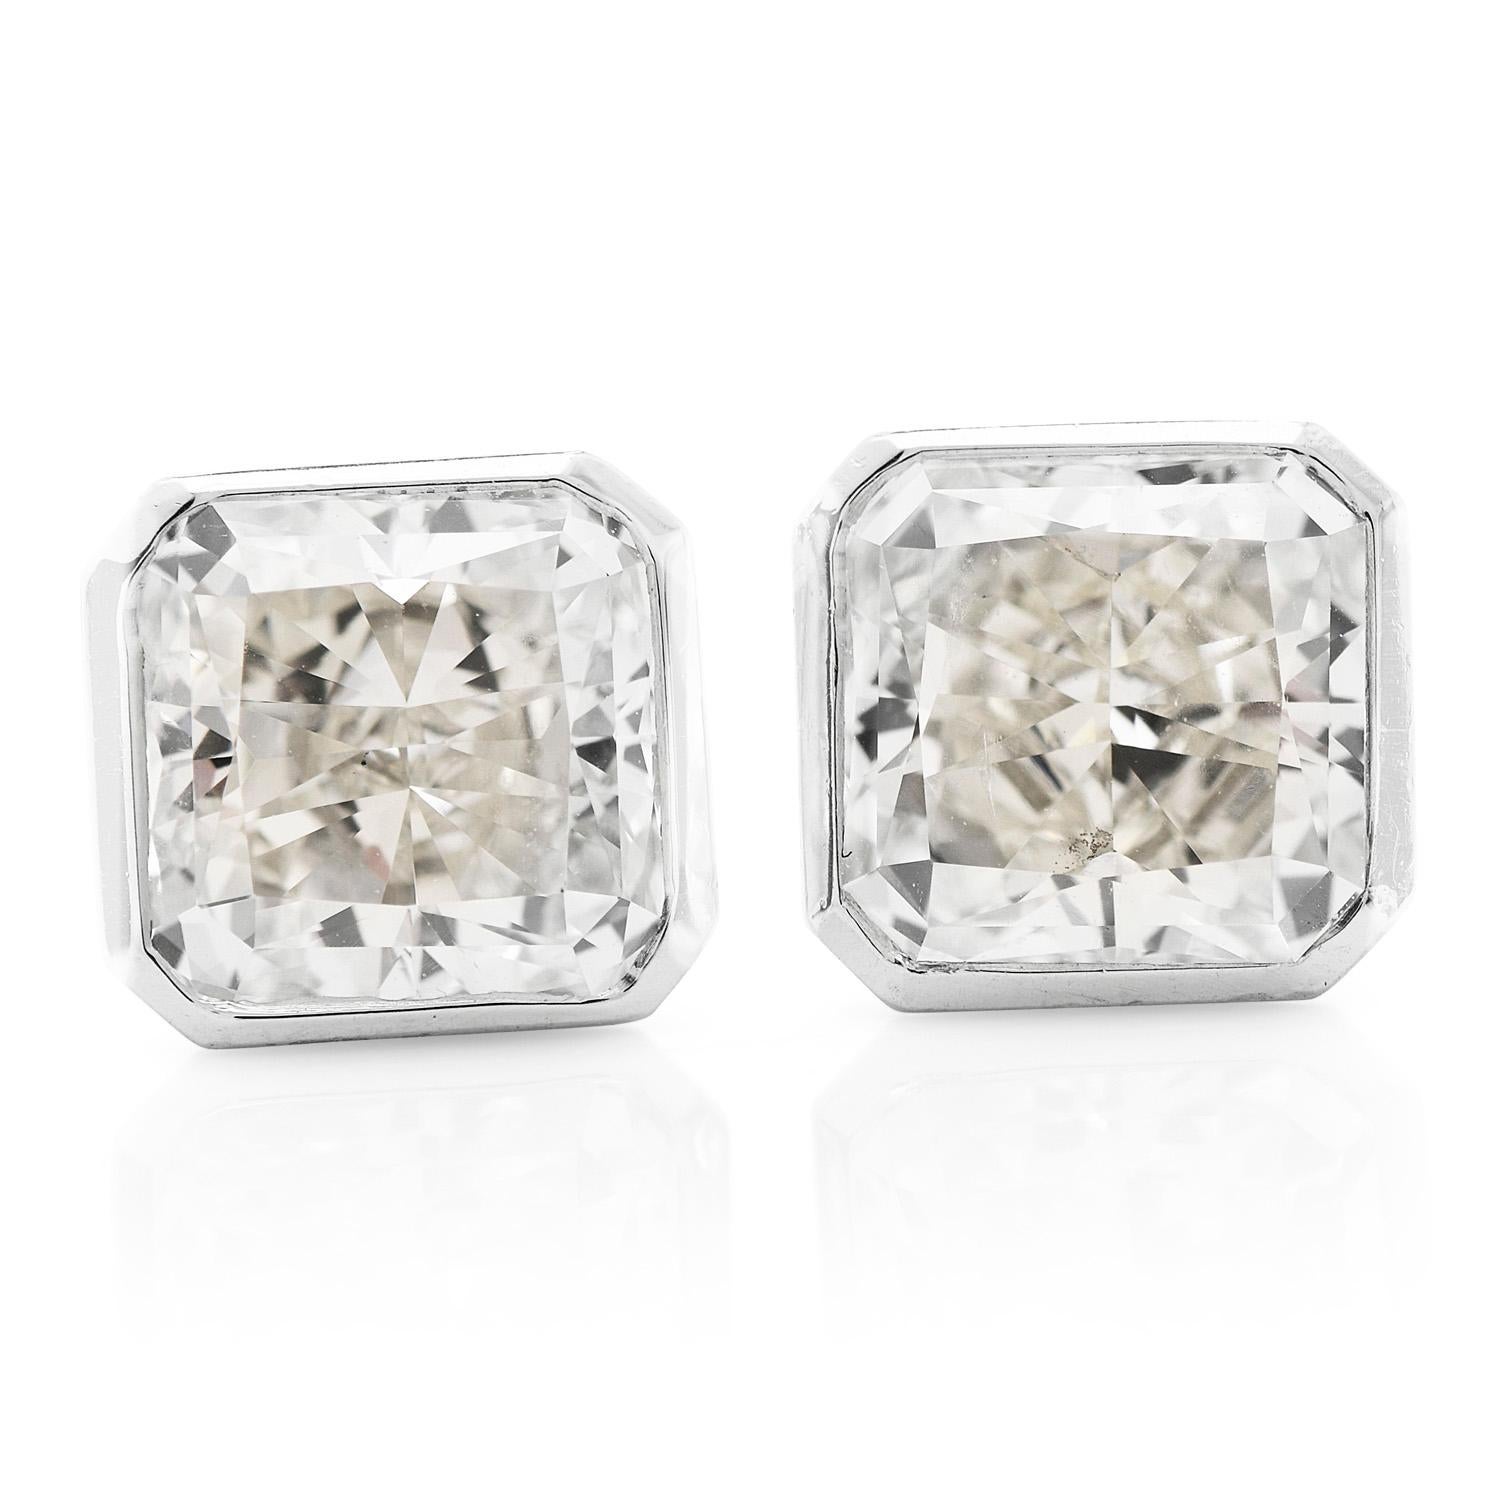 Every woman desires a pair of noticeable and striking diamond stud earrings. 

These exquisite Asscher Cut Diamond & Platinum Earrings, are an obvious choice! 

These elegant and bright earrings are crafted in a Platinum, bezel setting.  There are